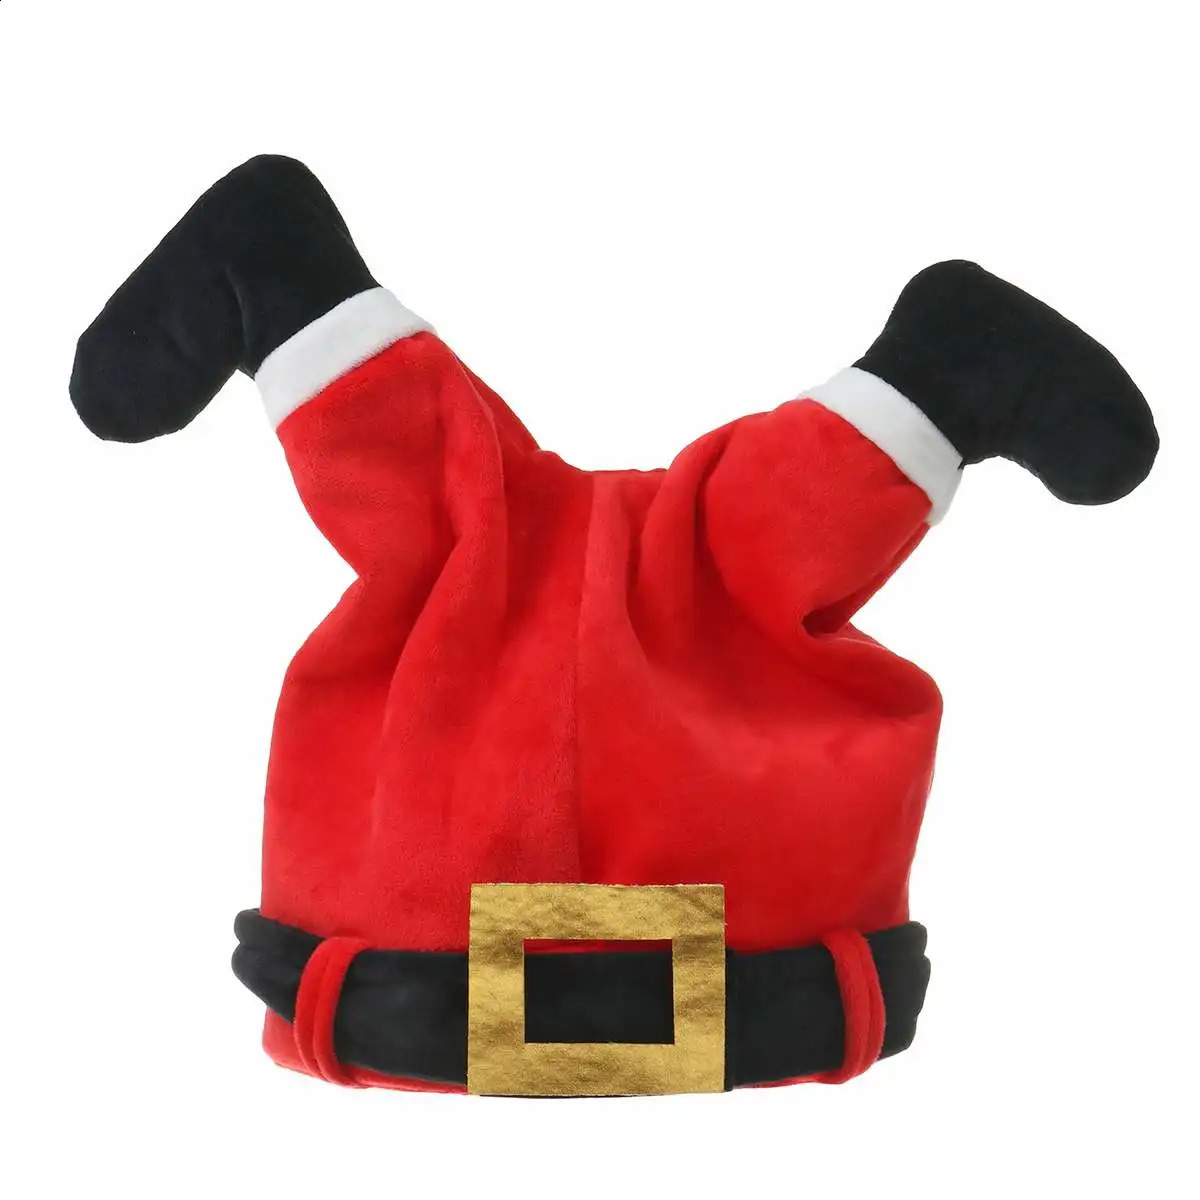 Beanie Skull Caps Fun Spoof Prank Electric Christmas Hat Gift Doll Sing Songs Santa Pants Toy For kids Adults In Stock 231118